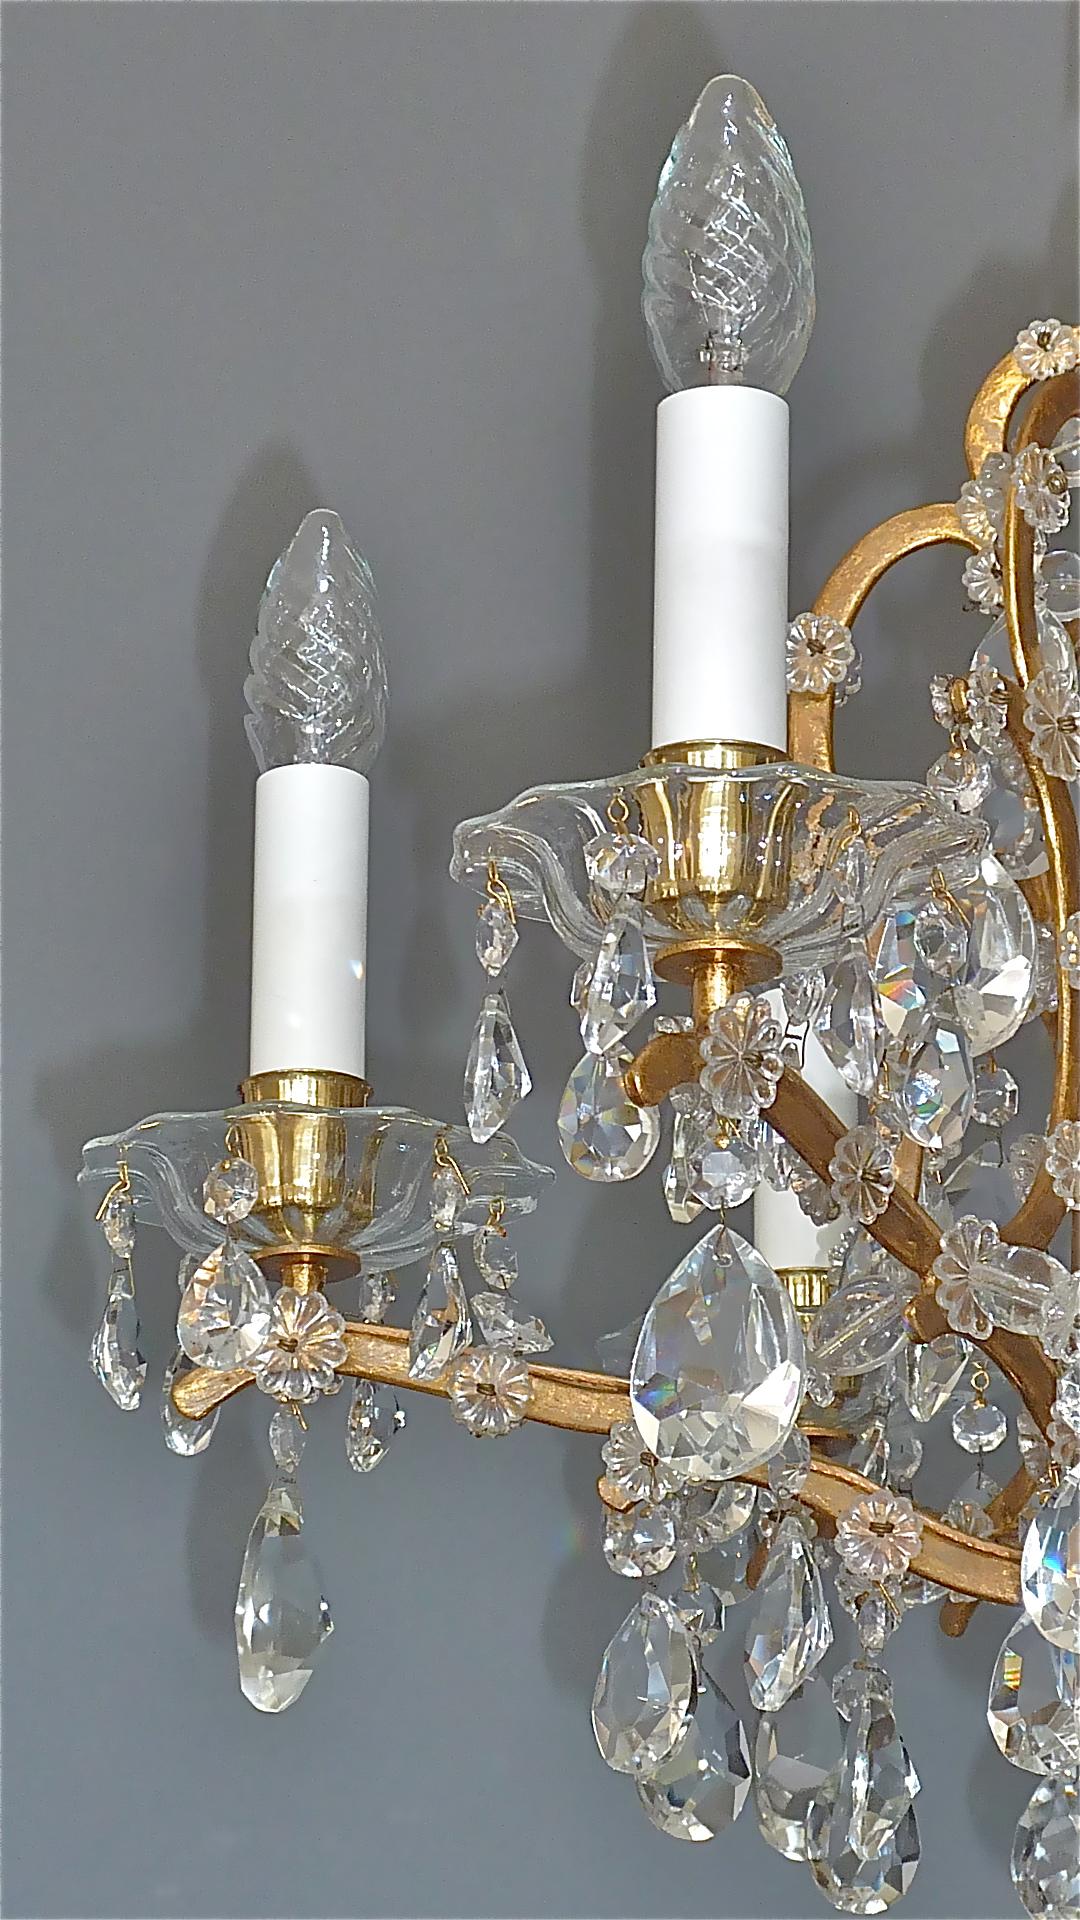 Baroque Lobmeyr Maria Theresia Style Chandelier 1950s Gilt Brass Faceted Crystal Glass For Sale